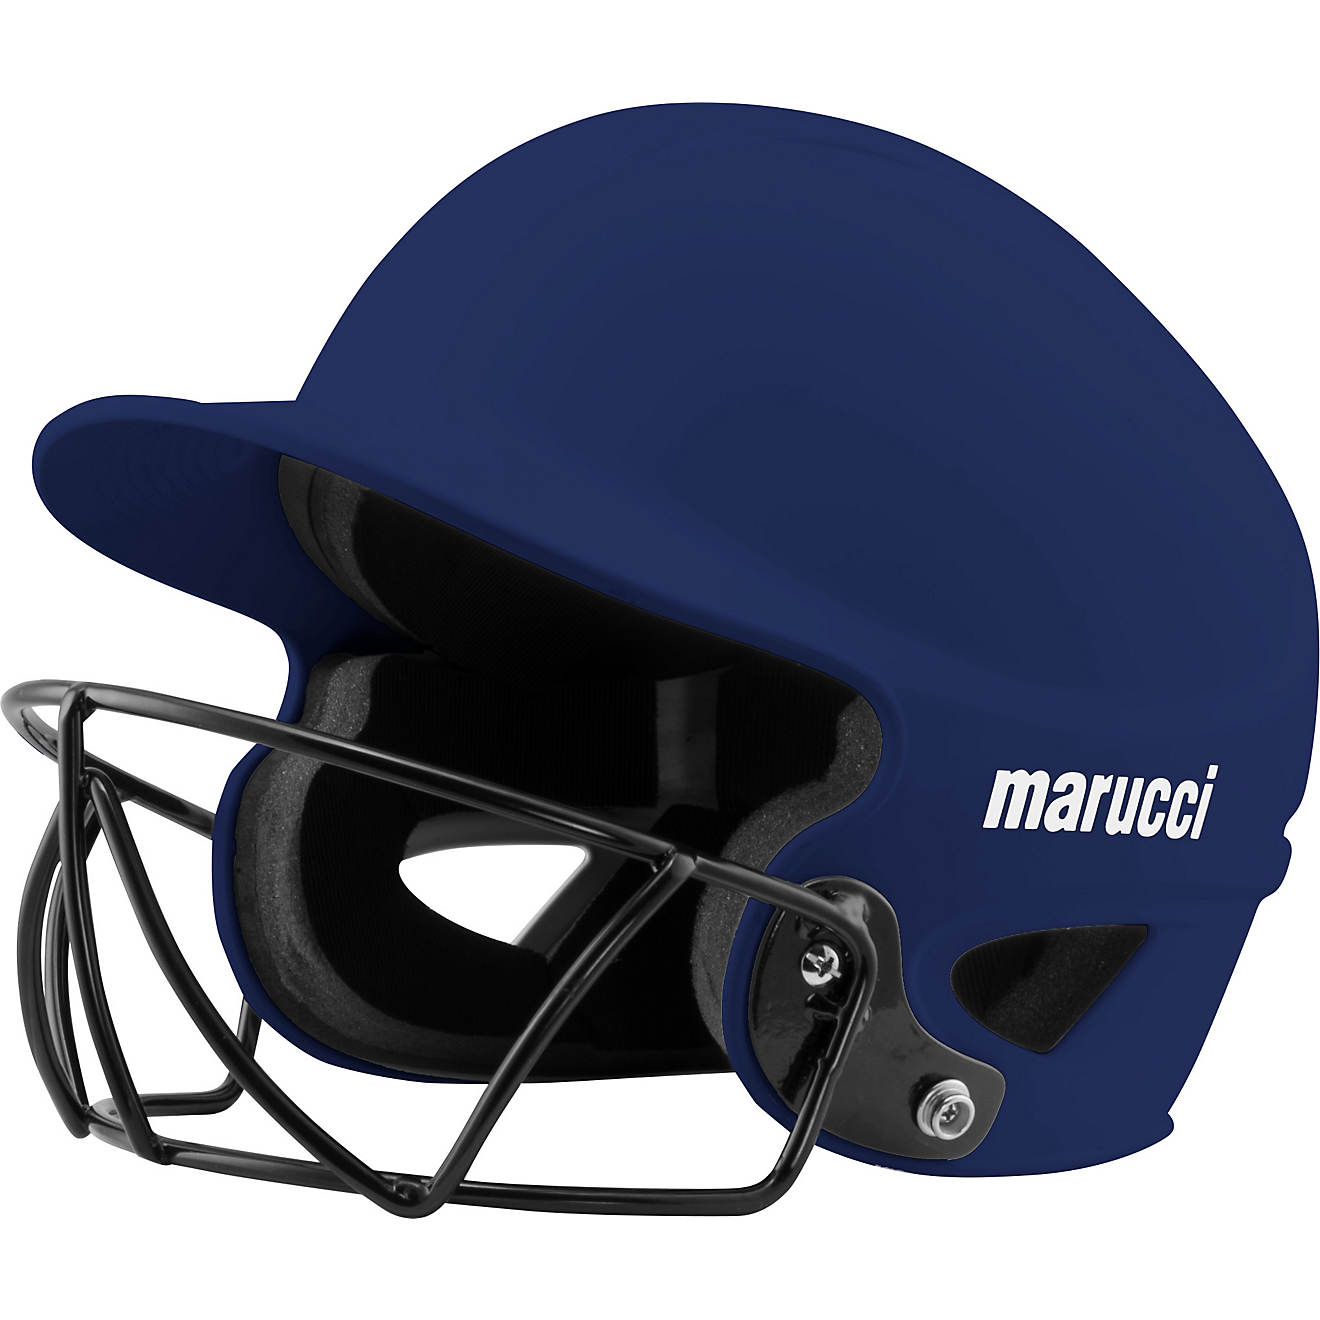 Marucci Women's Fast-Pitch Softball Helmet                                                                                       - view number 1